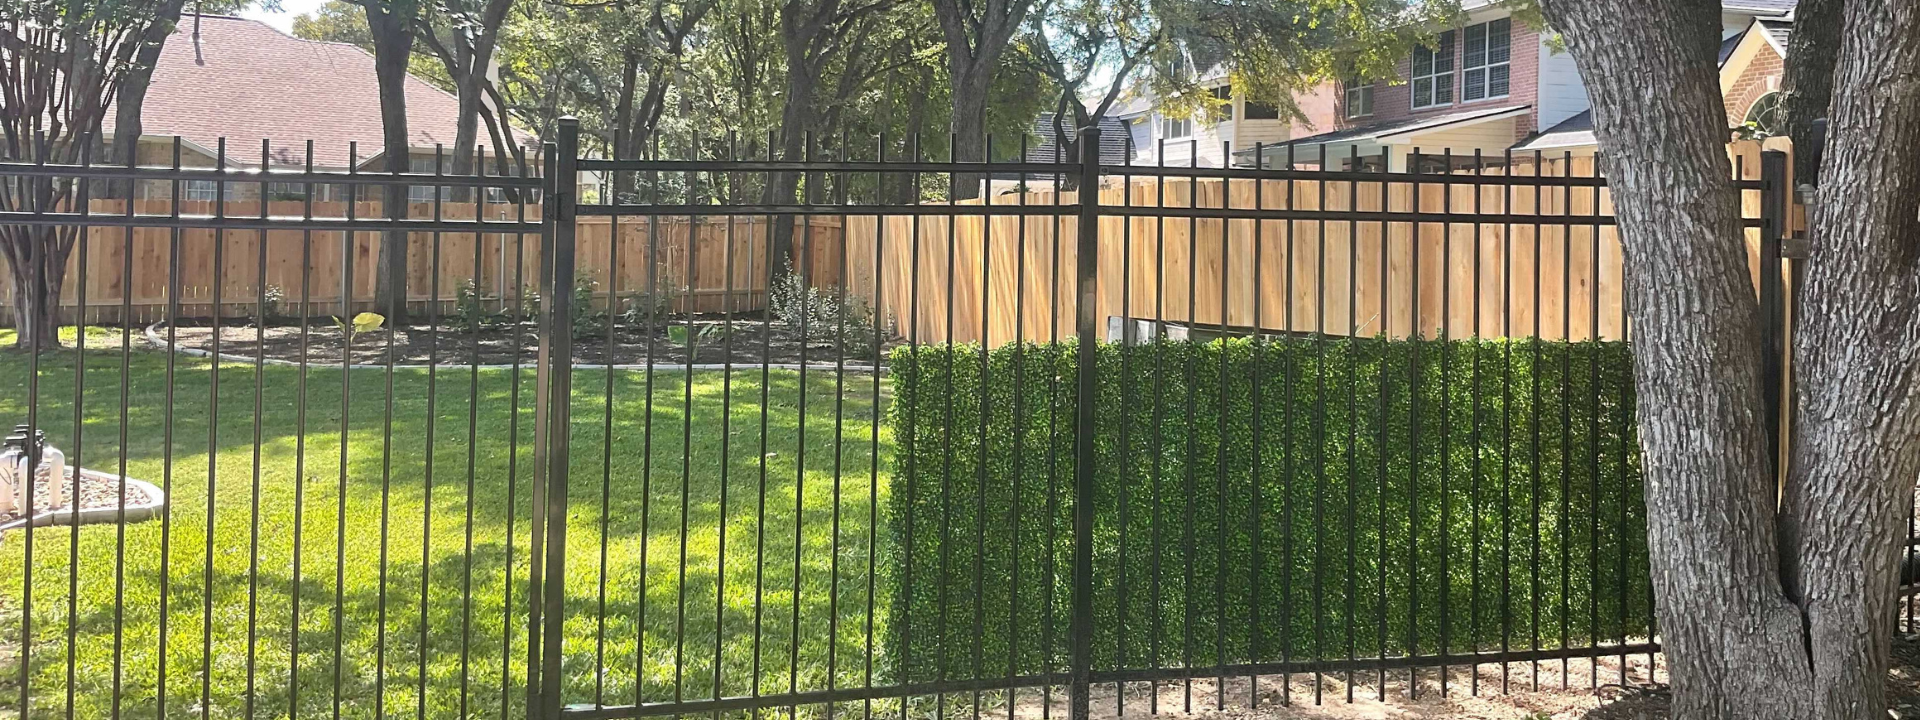 Wood fence and iron fencing of a big backyard in an Austin property, two parts of the backyard are enclosed by wood fence and the other parts by iron fence